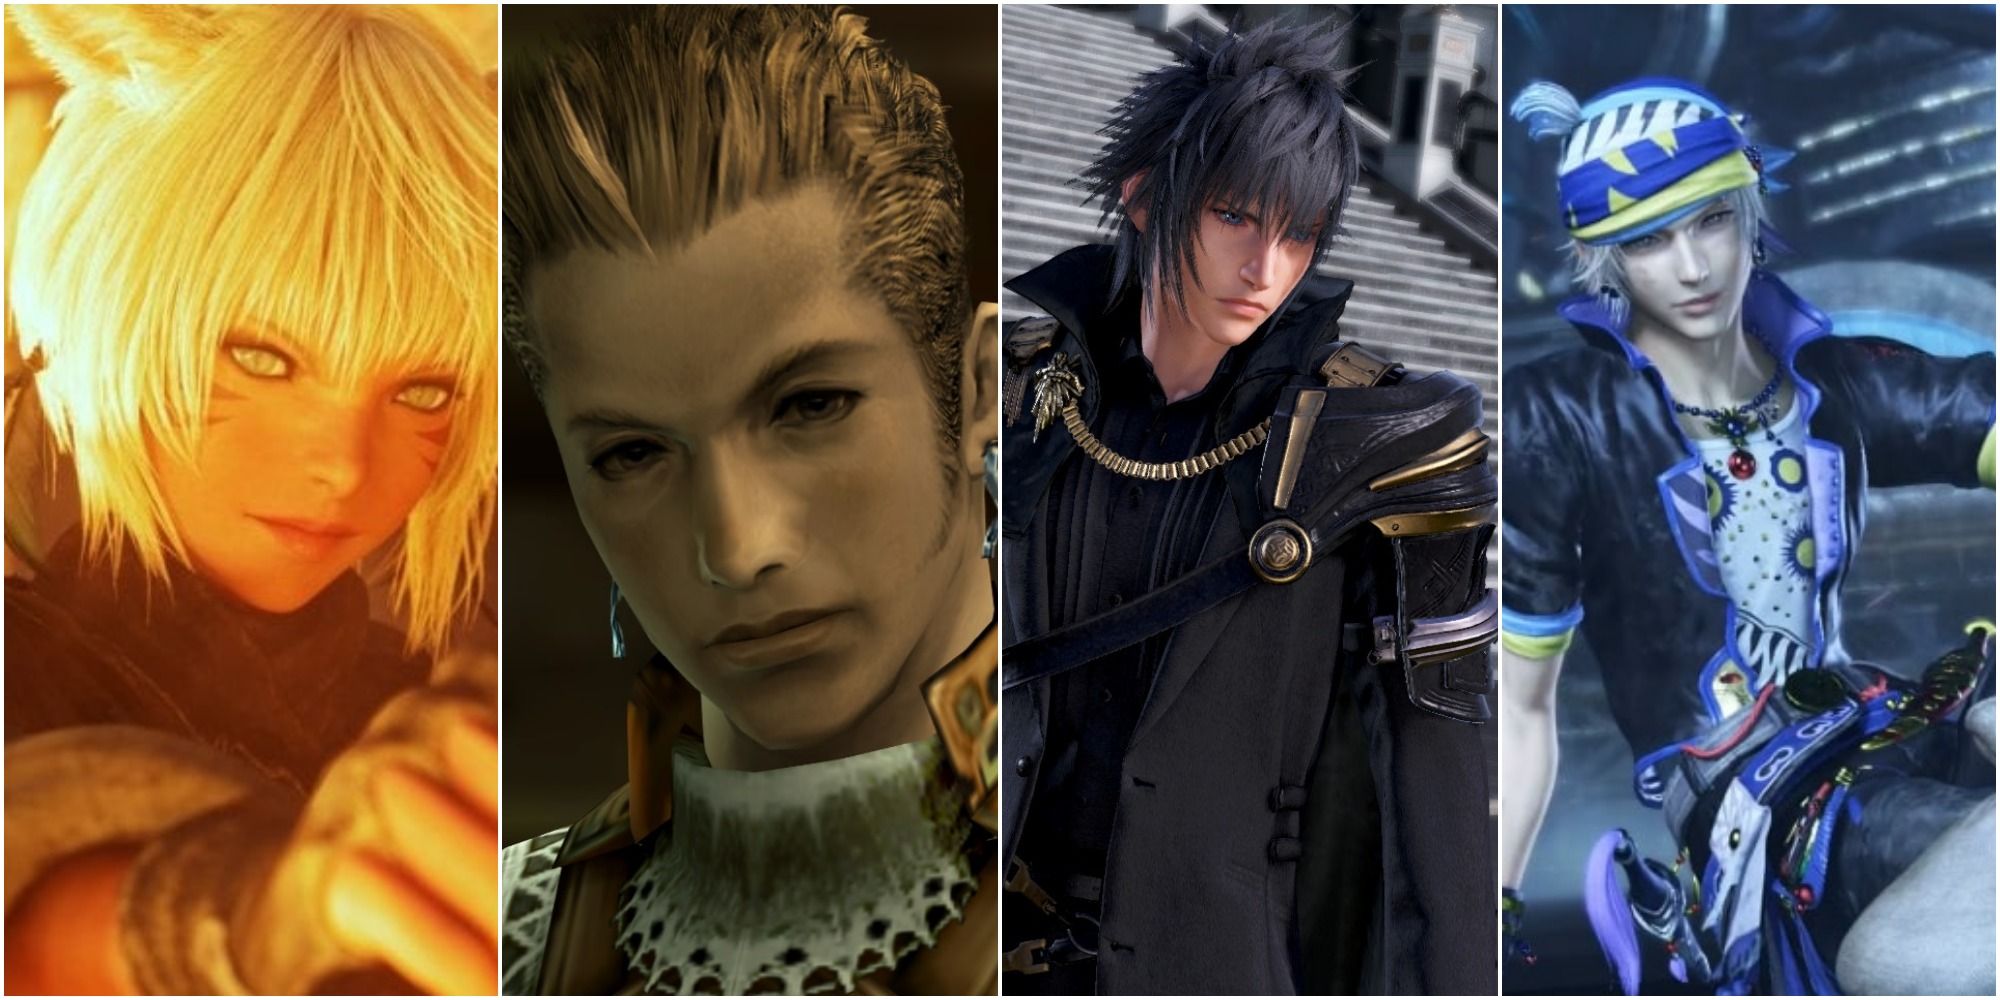 Louis Vuitton's new model is a Final Fantasy character